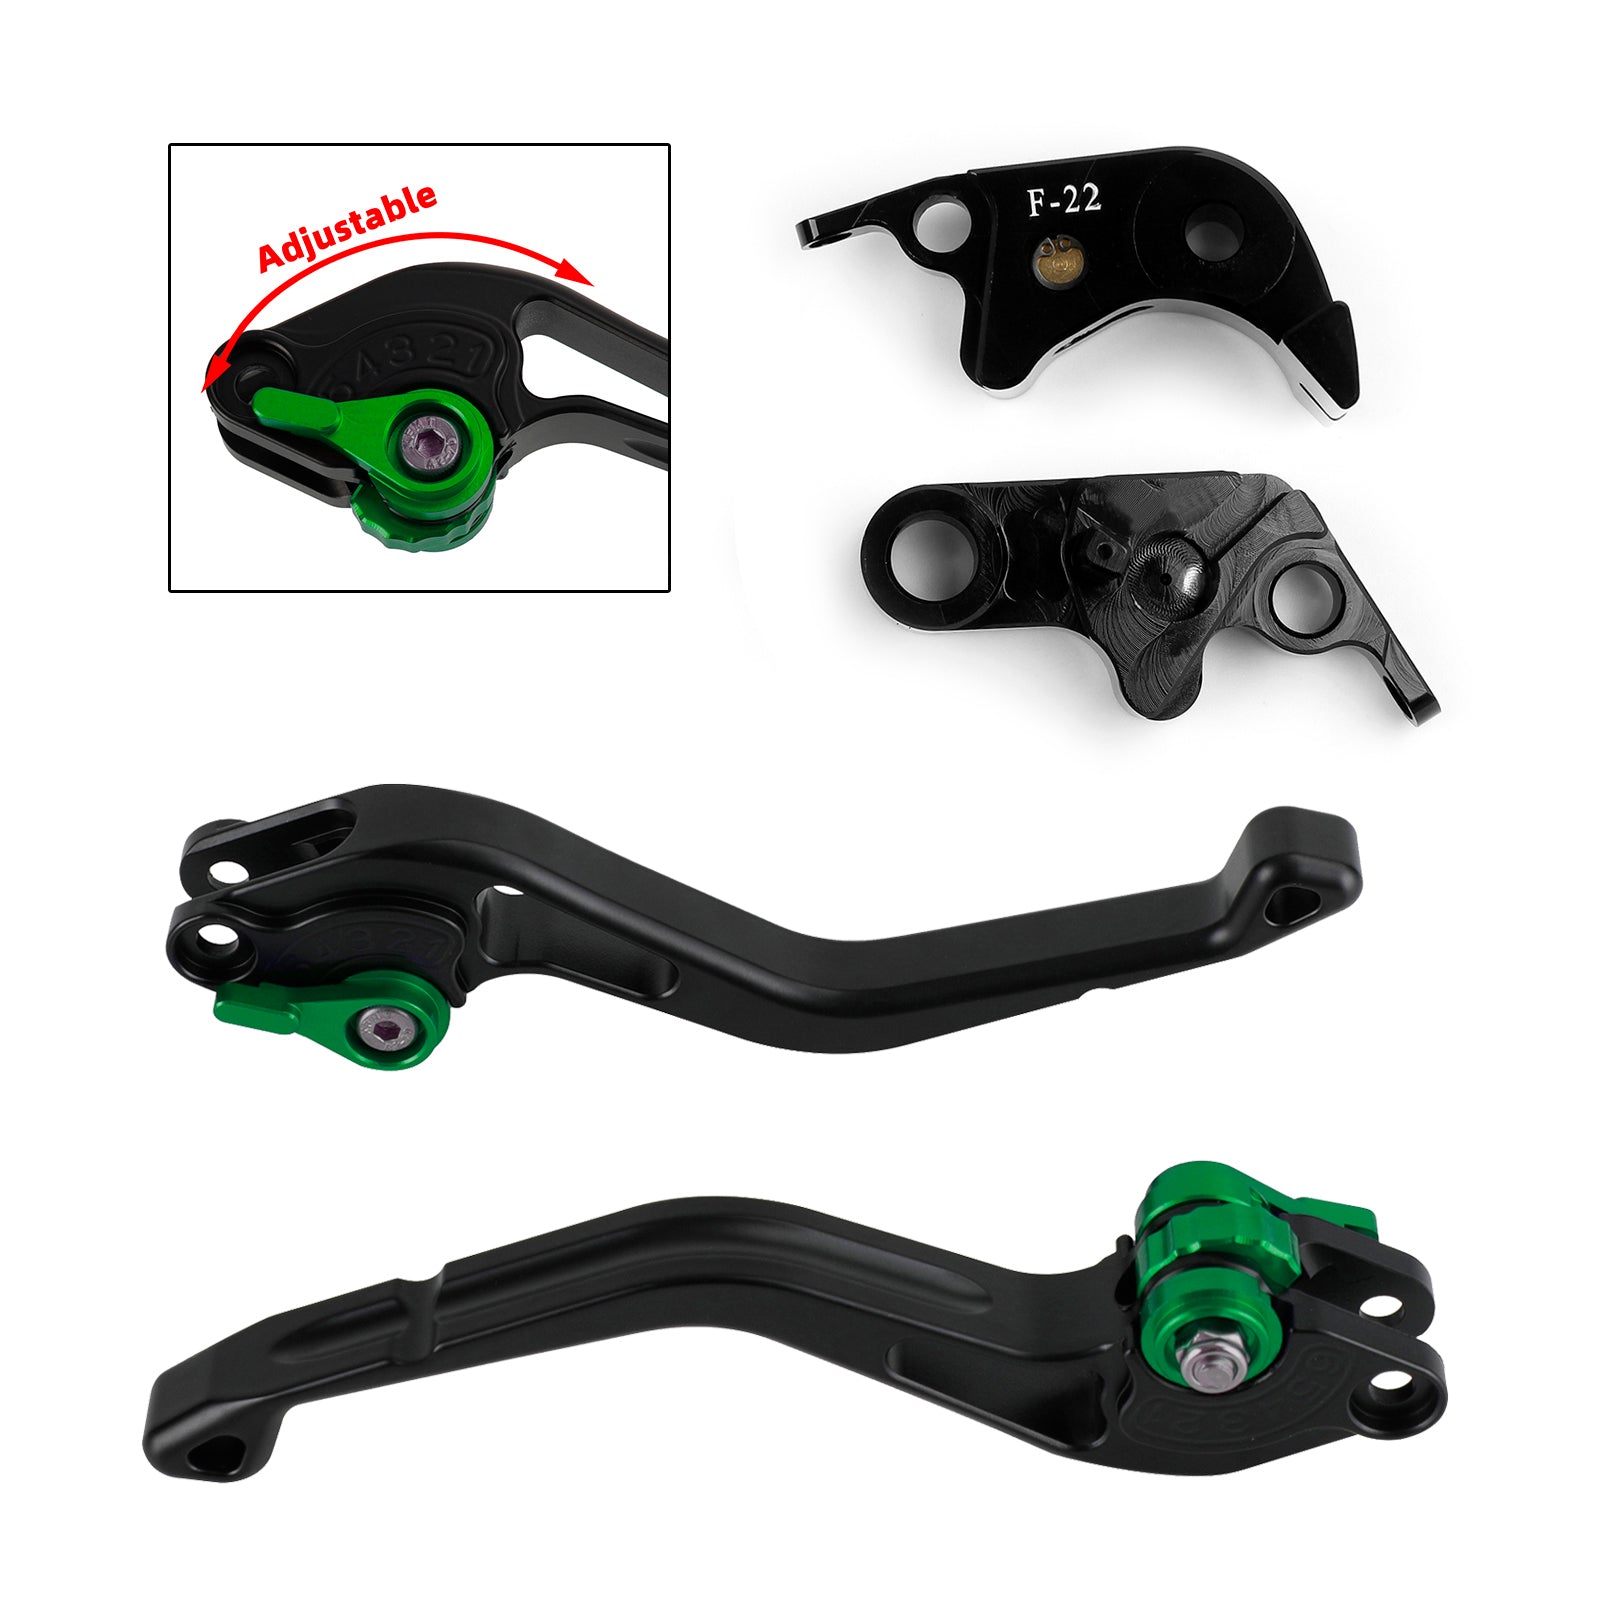 NEW Short Clutch Brake Lever fit for BMW S1000R 2014 S1000RR 2010-2014